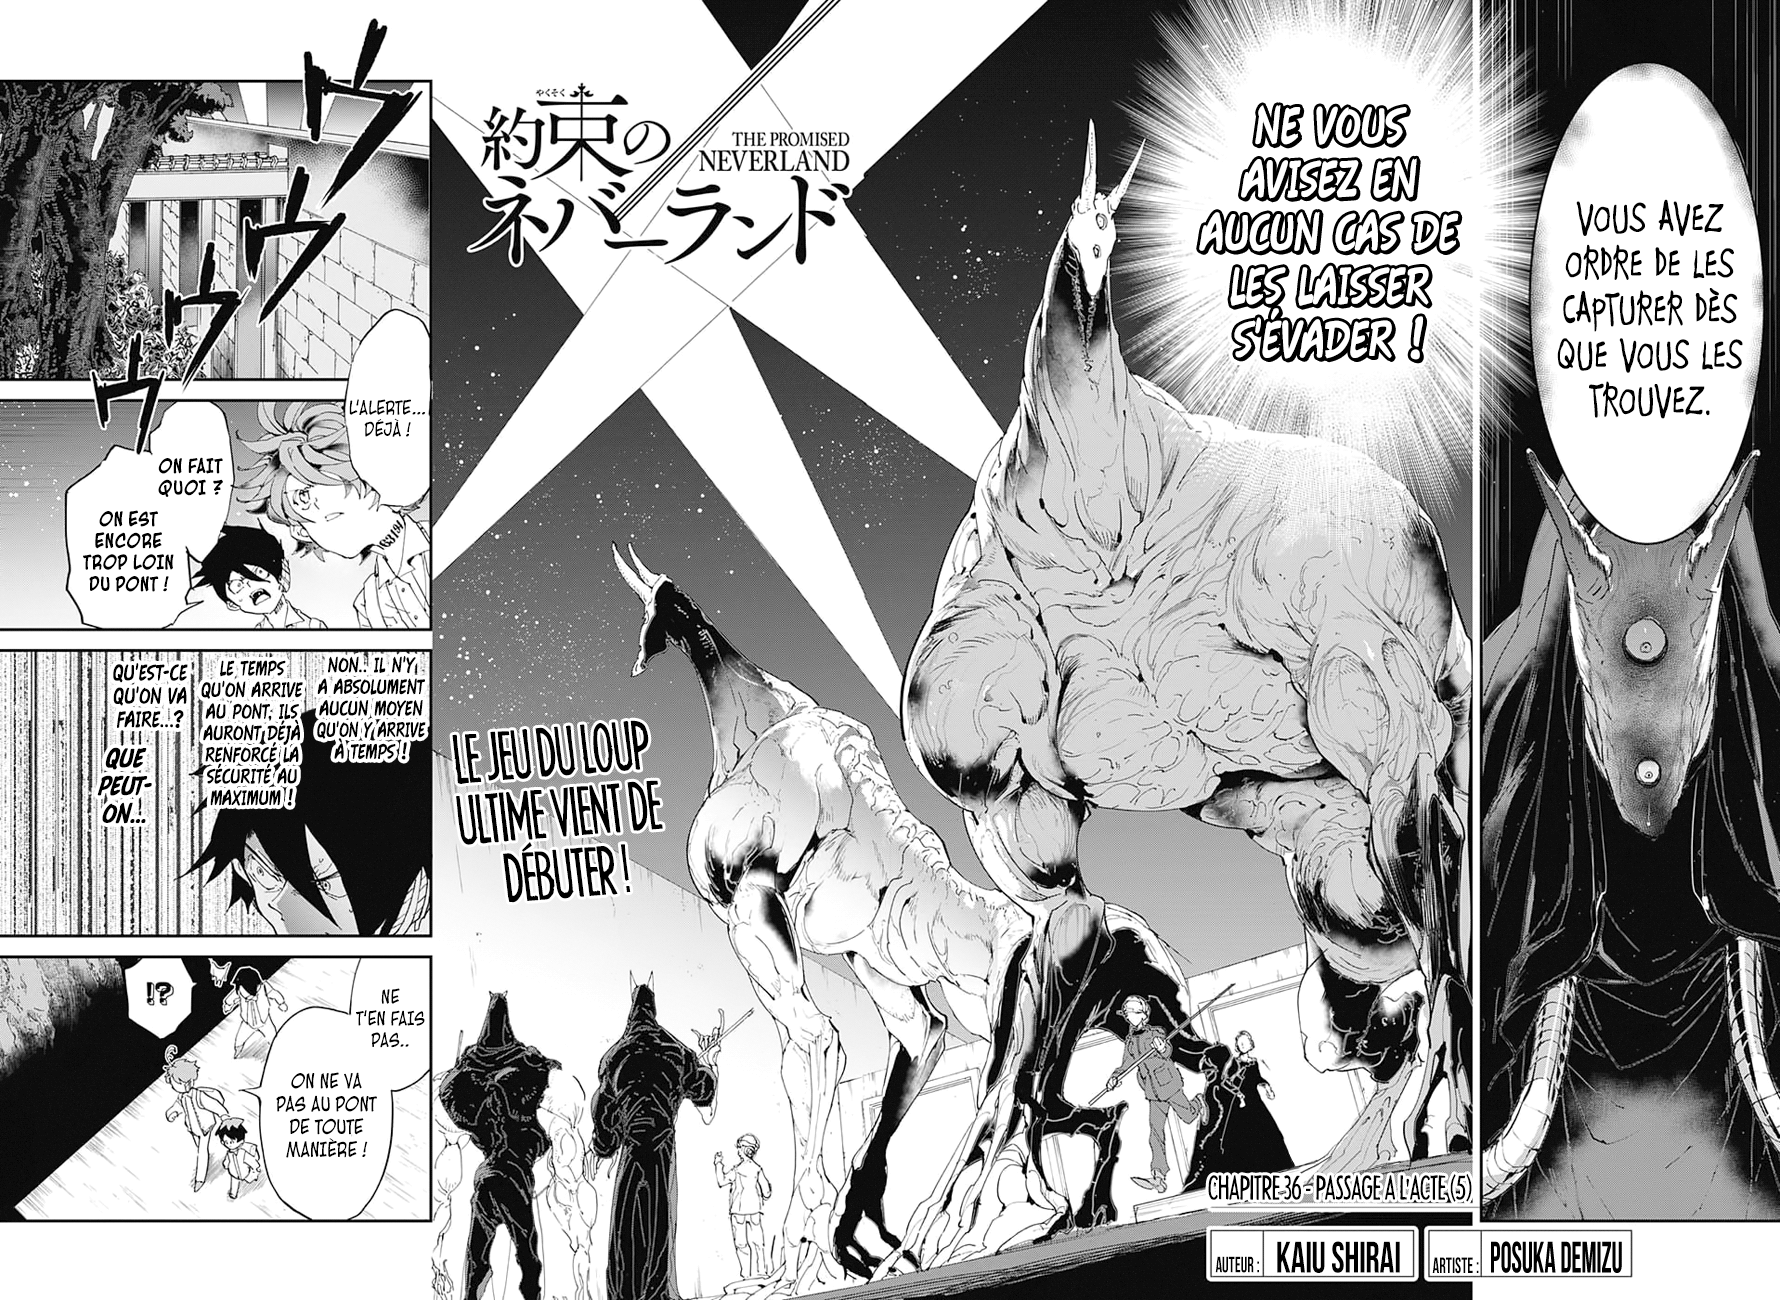 The Promised Neverland: Chapter chapitre-36 - Page 2